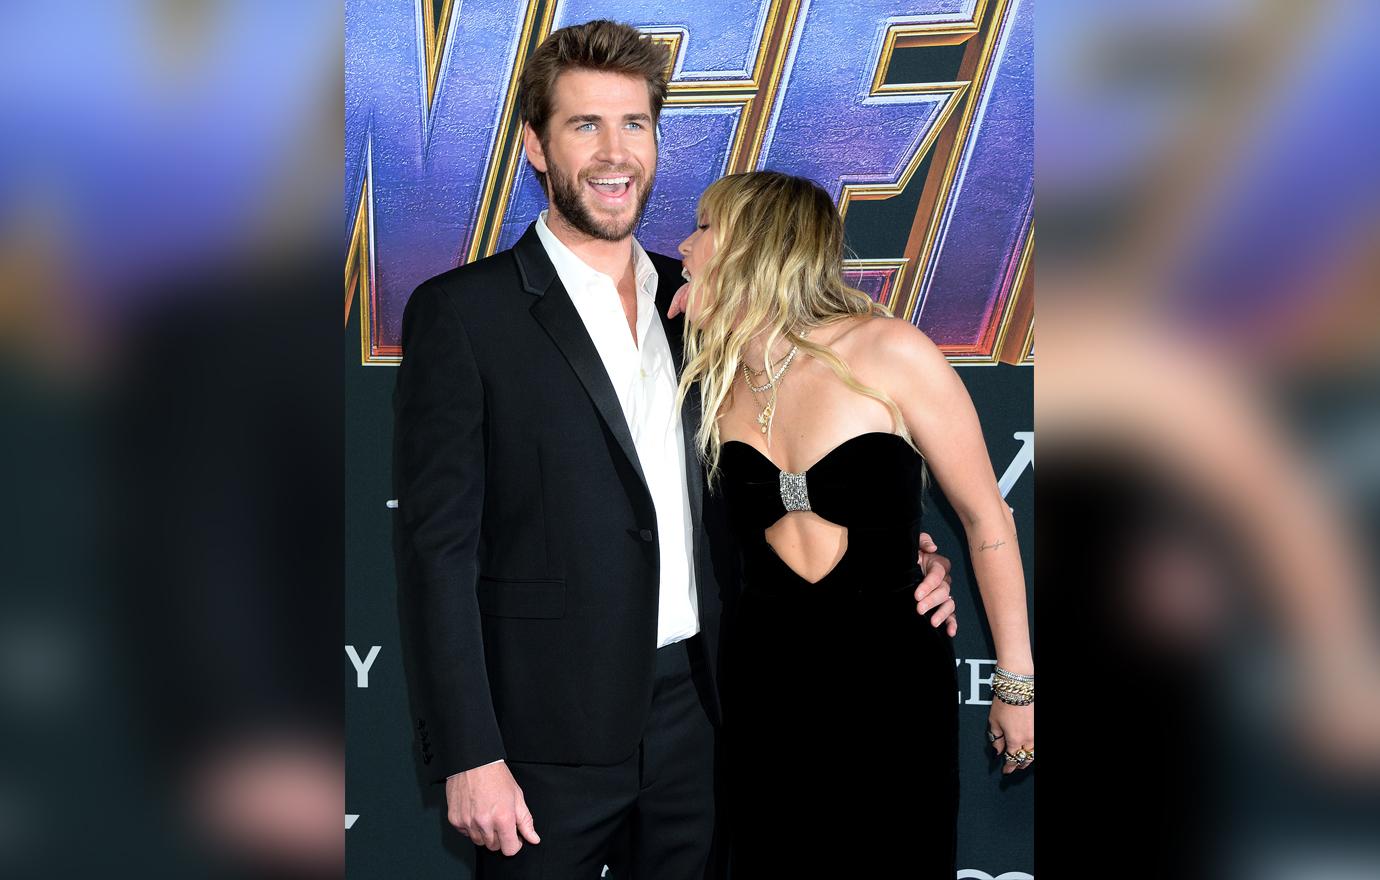 Liam Hemsworth Laughs Wearing a Suit on The Avengers Premiere Red Carpet As Miley Cyrus Poses Licking Towards His Neck Wearing A Tight Black Dress With Cut Out